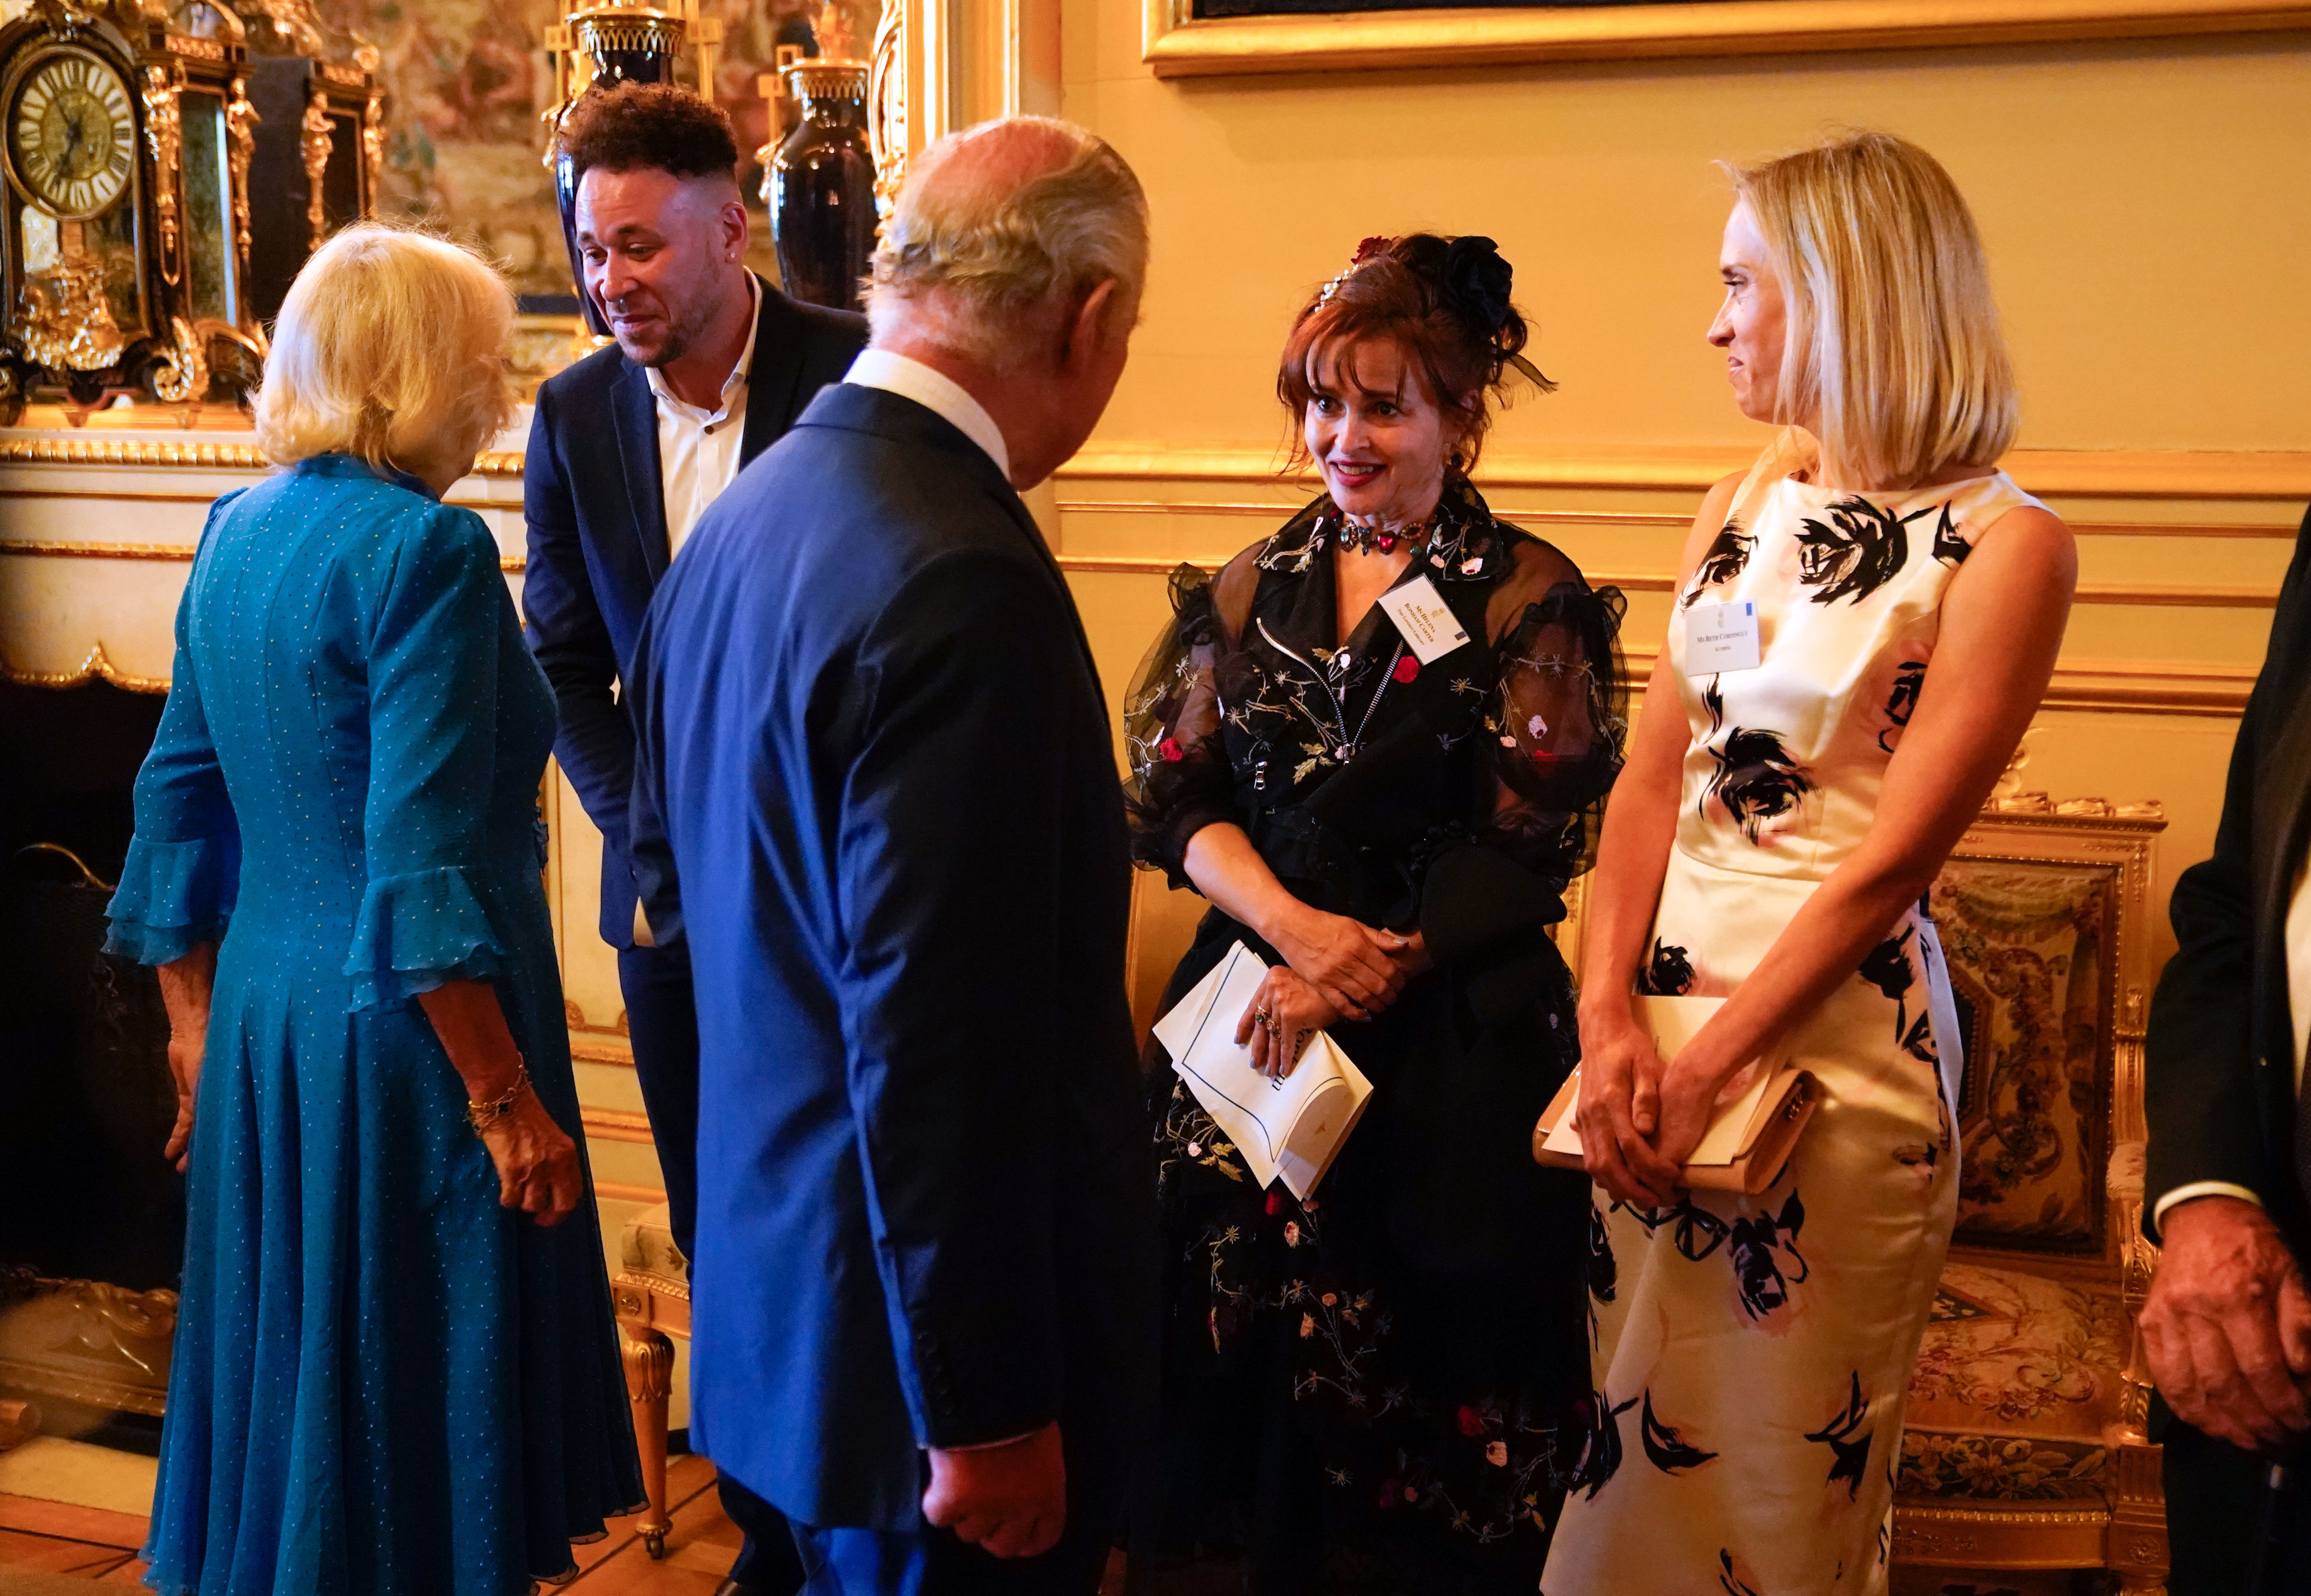 <p>King Charles III met with actress Helena Bonham Carter -- who played his aunt, Princess Margaret, on "The Crown" -- during a reception at Windsor Castle in WIndsor, England, on July 18, 2023, to celebrate the work of William Shakespeare on the 400th anniversary of the publication of the first Shakespeare Folio.</p>